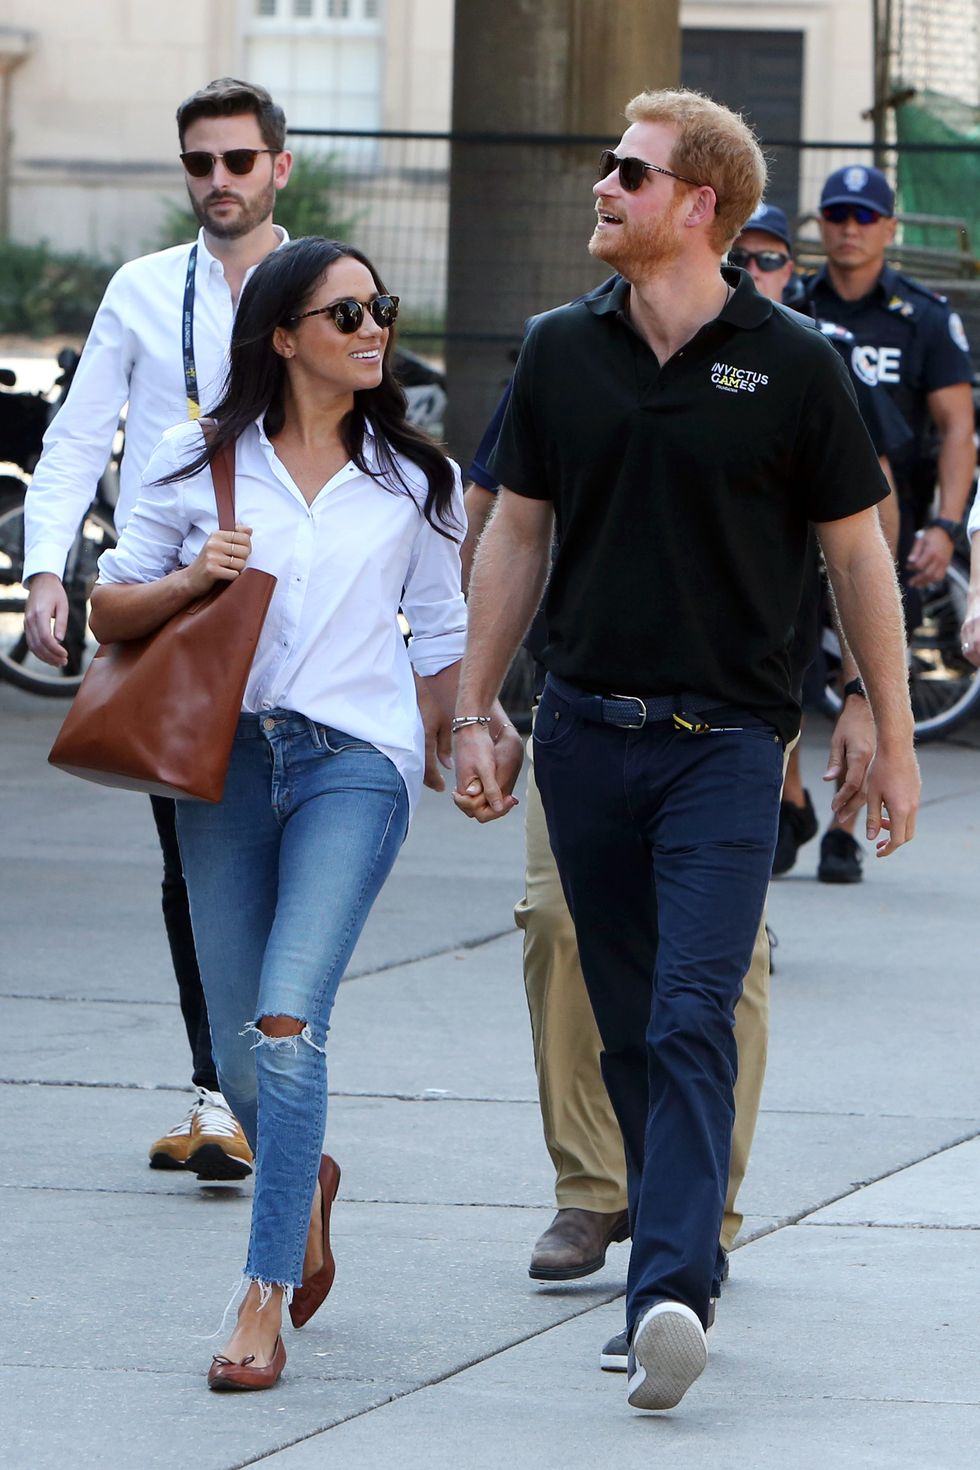 Duke and Duchess of Sussex at the 2017 Invictus Games